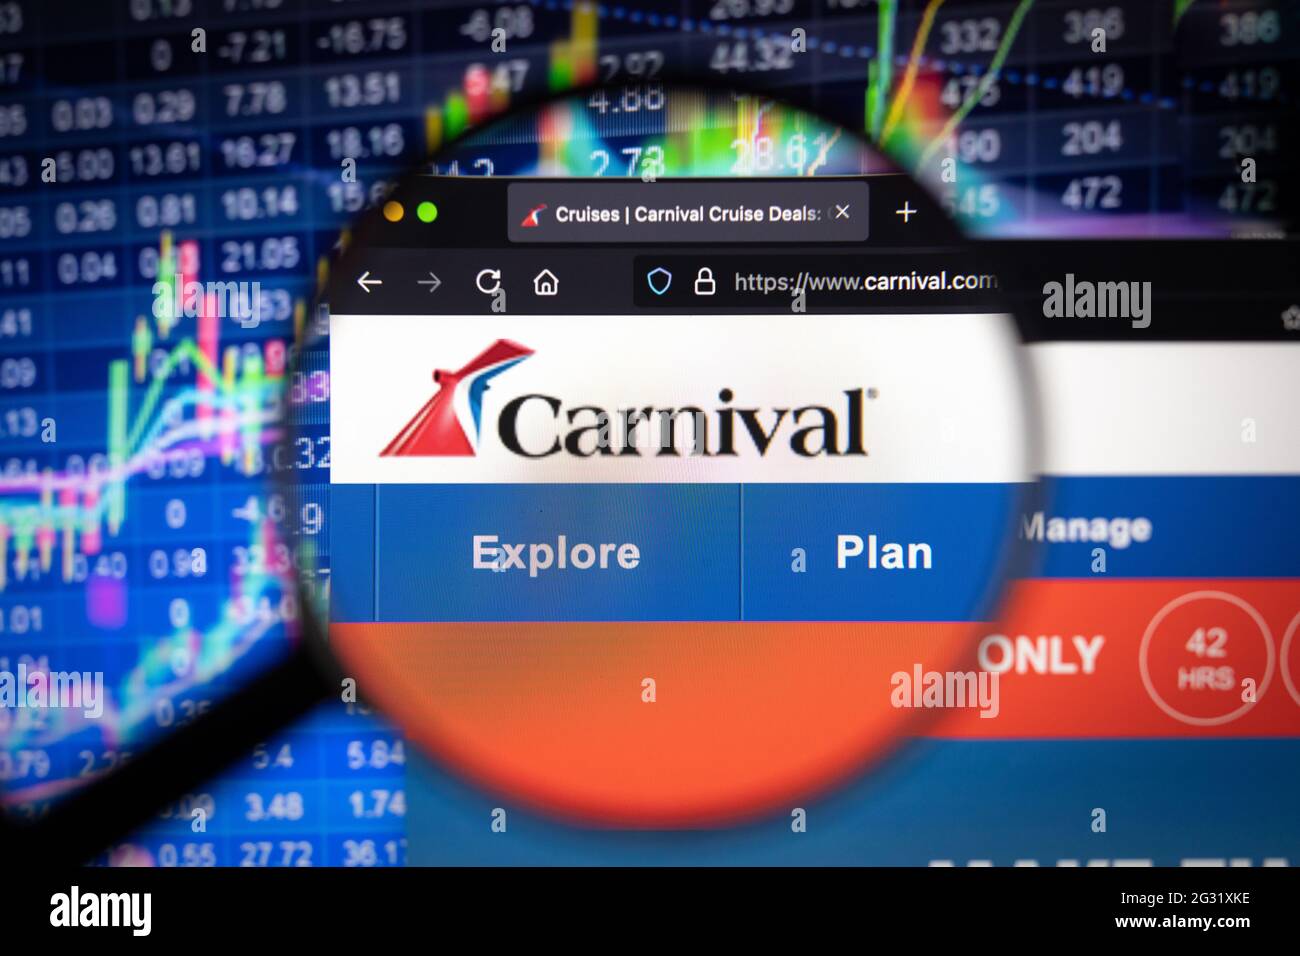 Carnival Cruise company logo on a website with blurry stock market developments in the background, seen on a computer screen Stock Photo